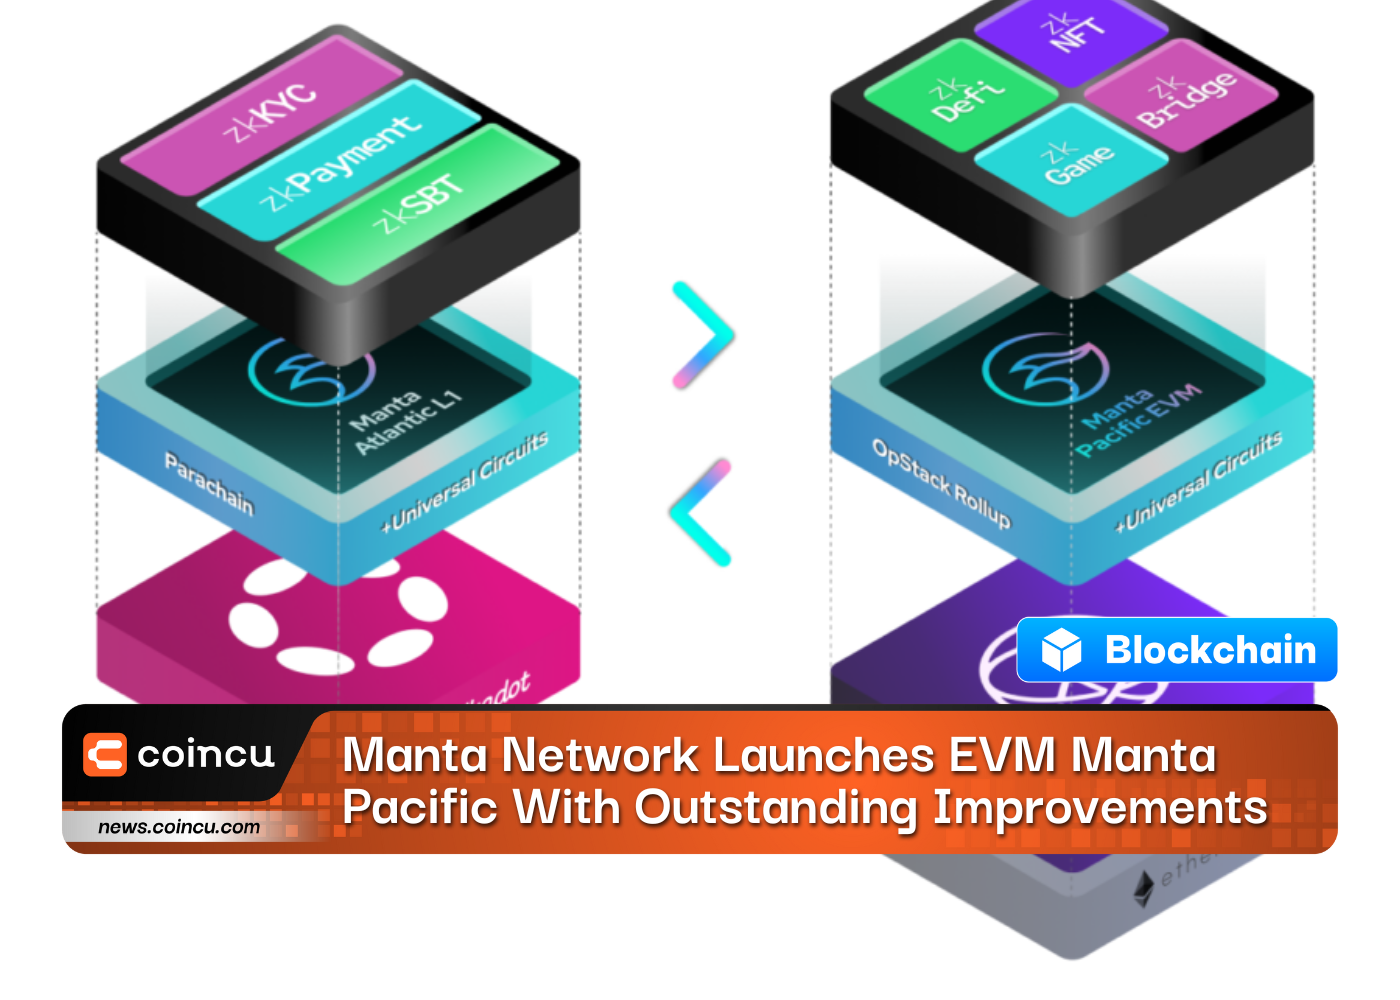 Manta Network Launches EVM Manta Pacific With Outstanding Improvements